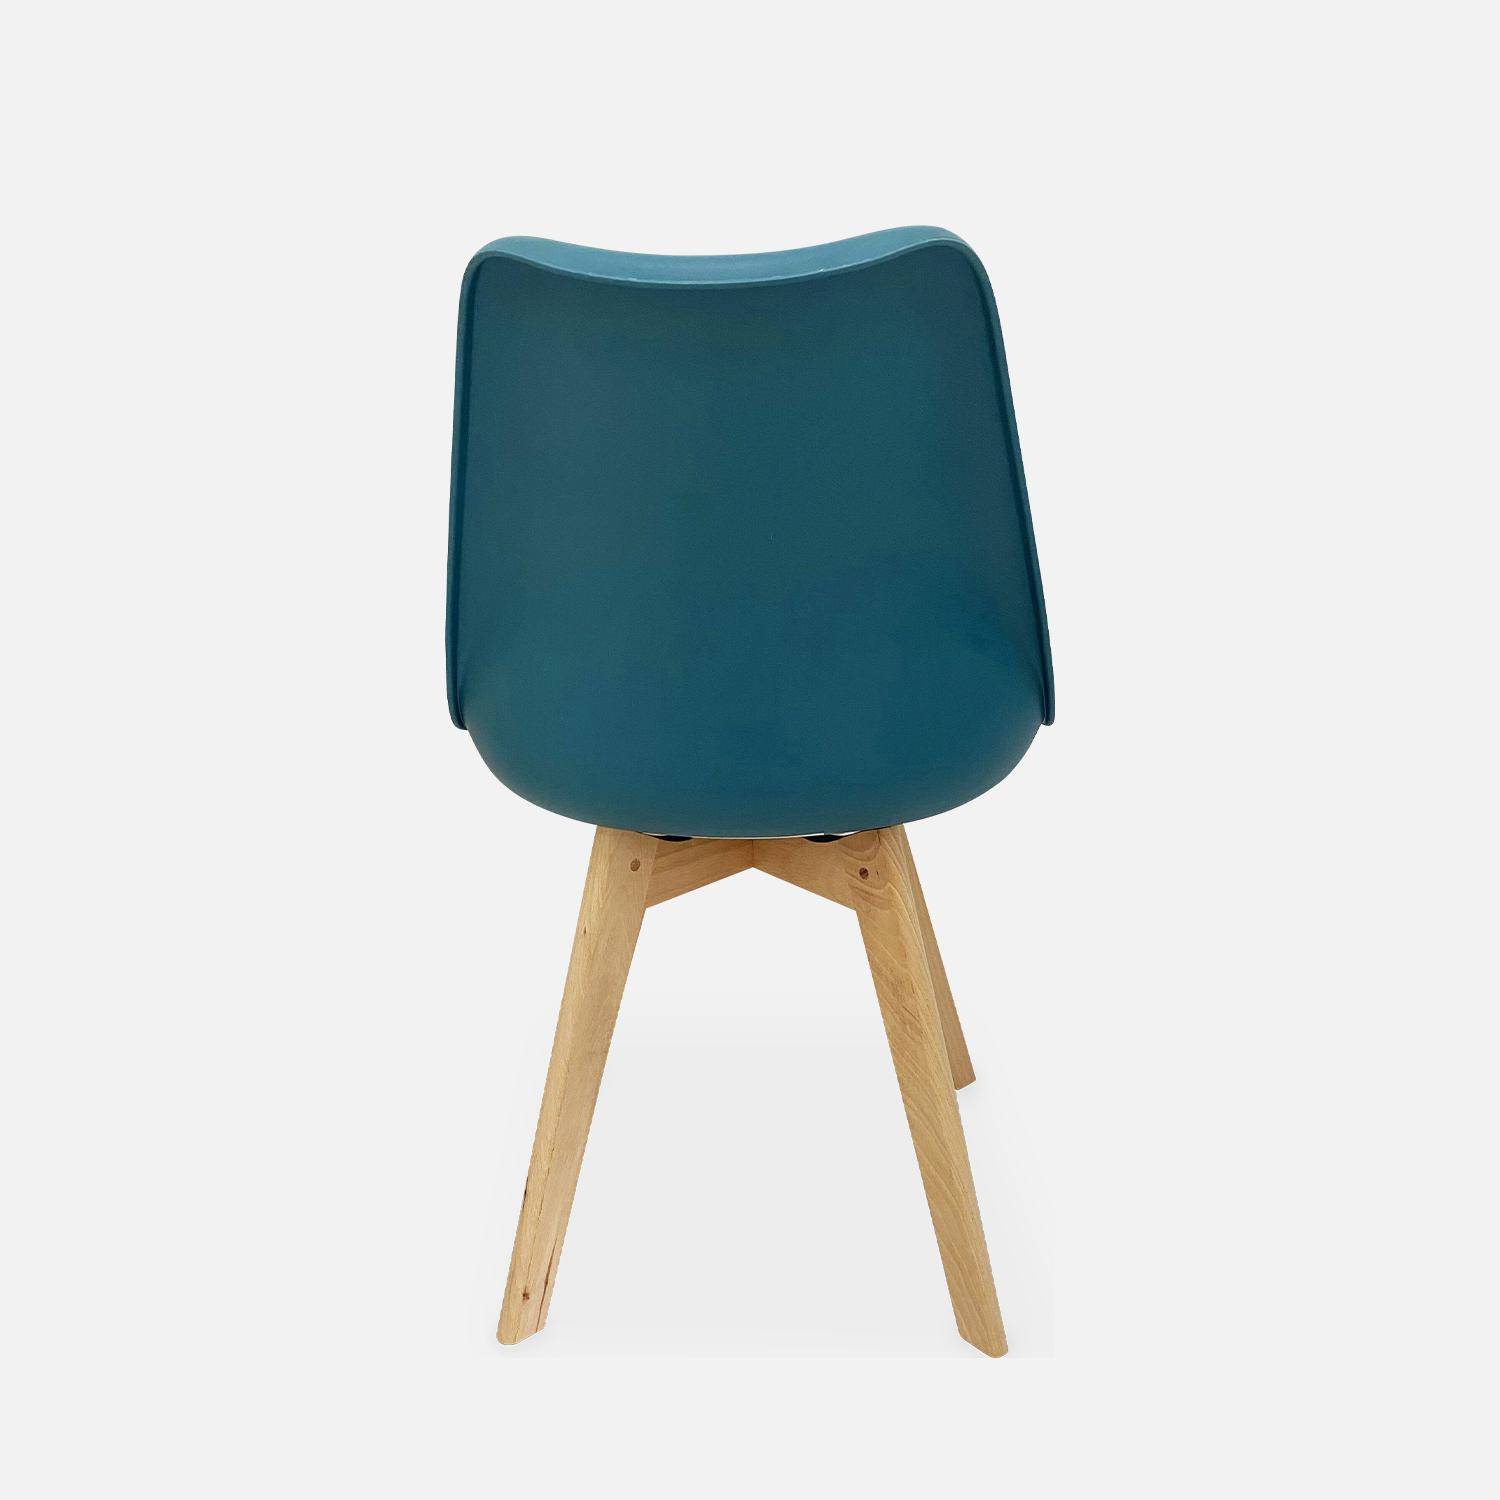 Pair of scandi-style faux-leather dining chair, blue, L49 x D55 x H81cm, NILS,sweeek,Photo4